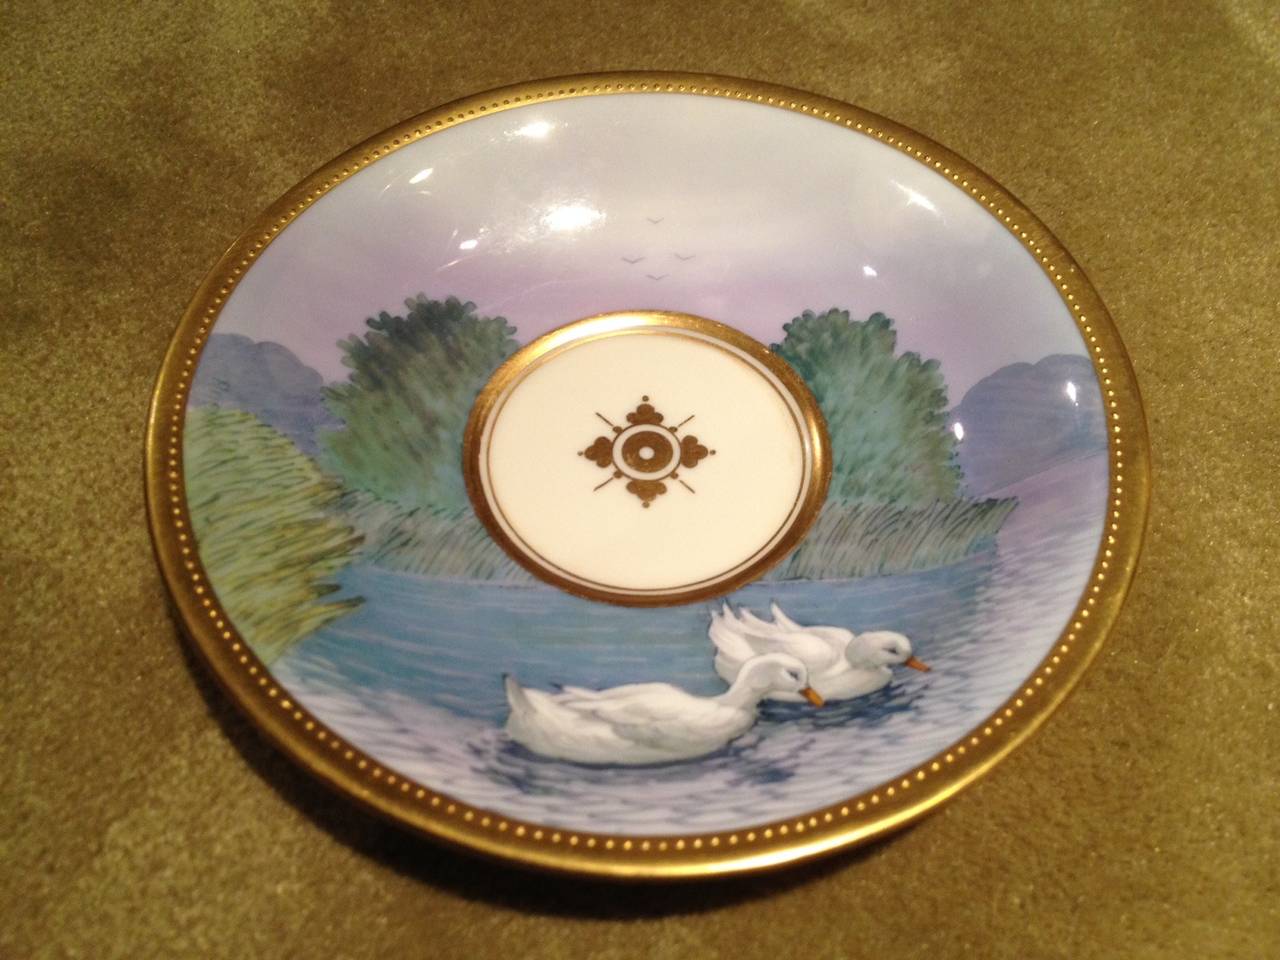 German Extremely Rare Cup and Saucer by Lamm Dresden Signed Ander, circa 1920